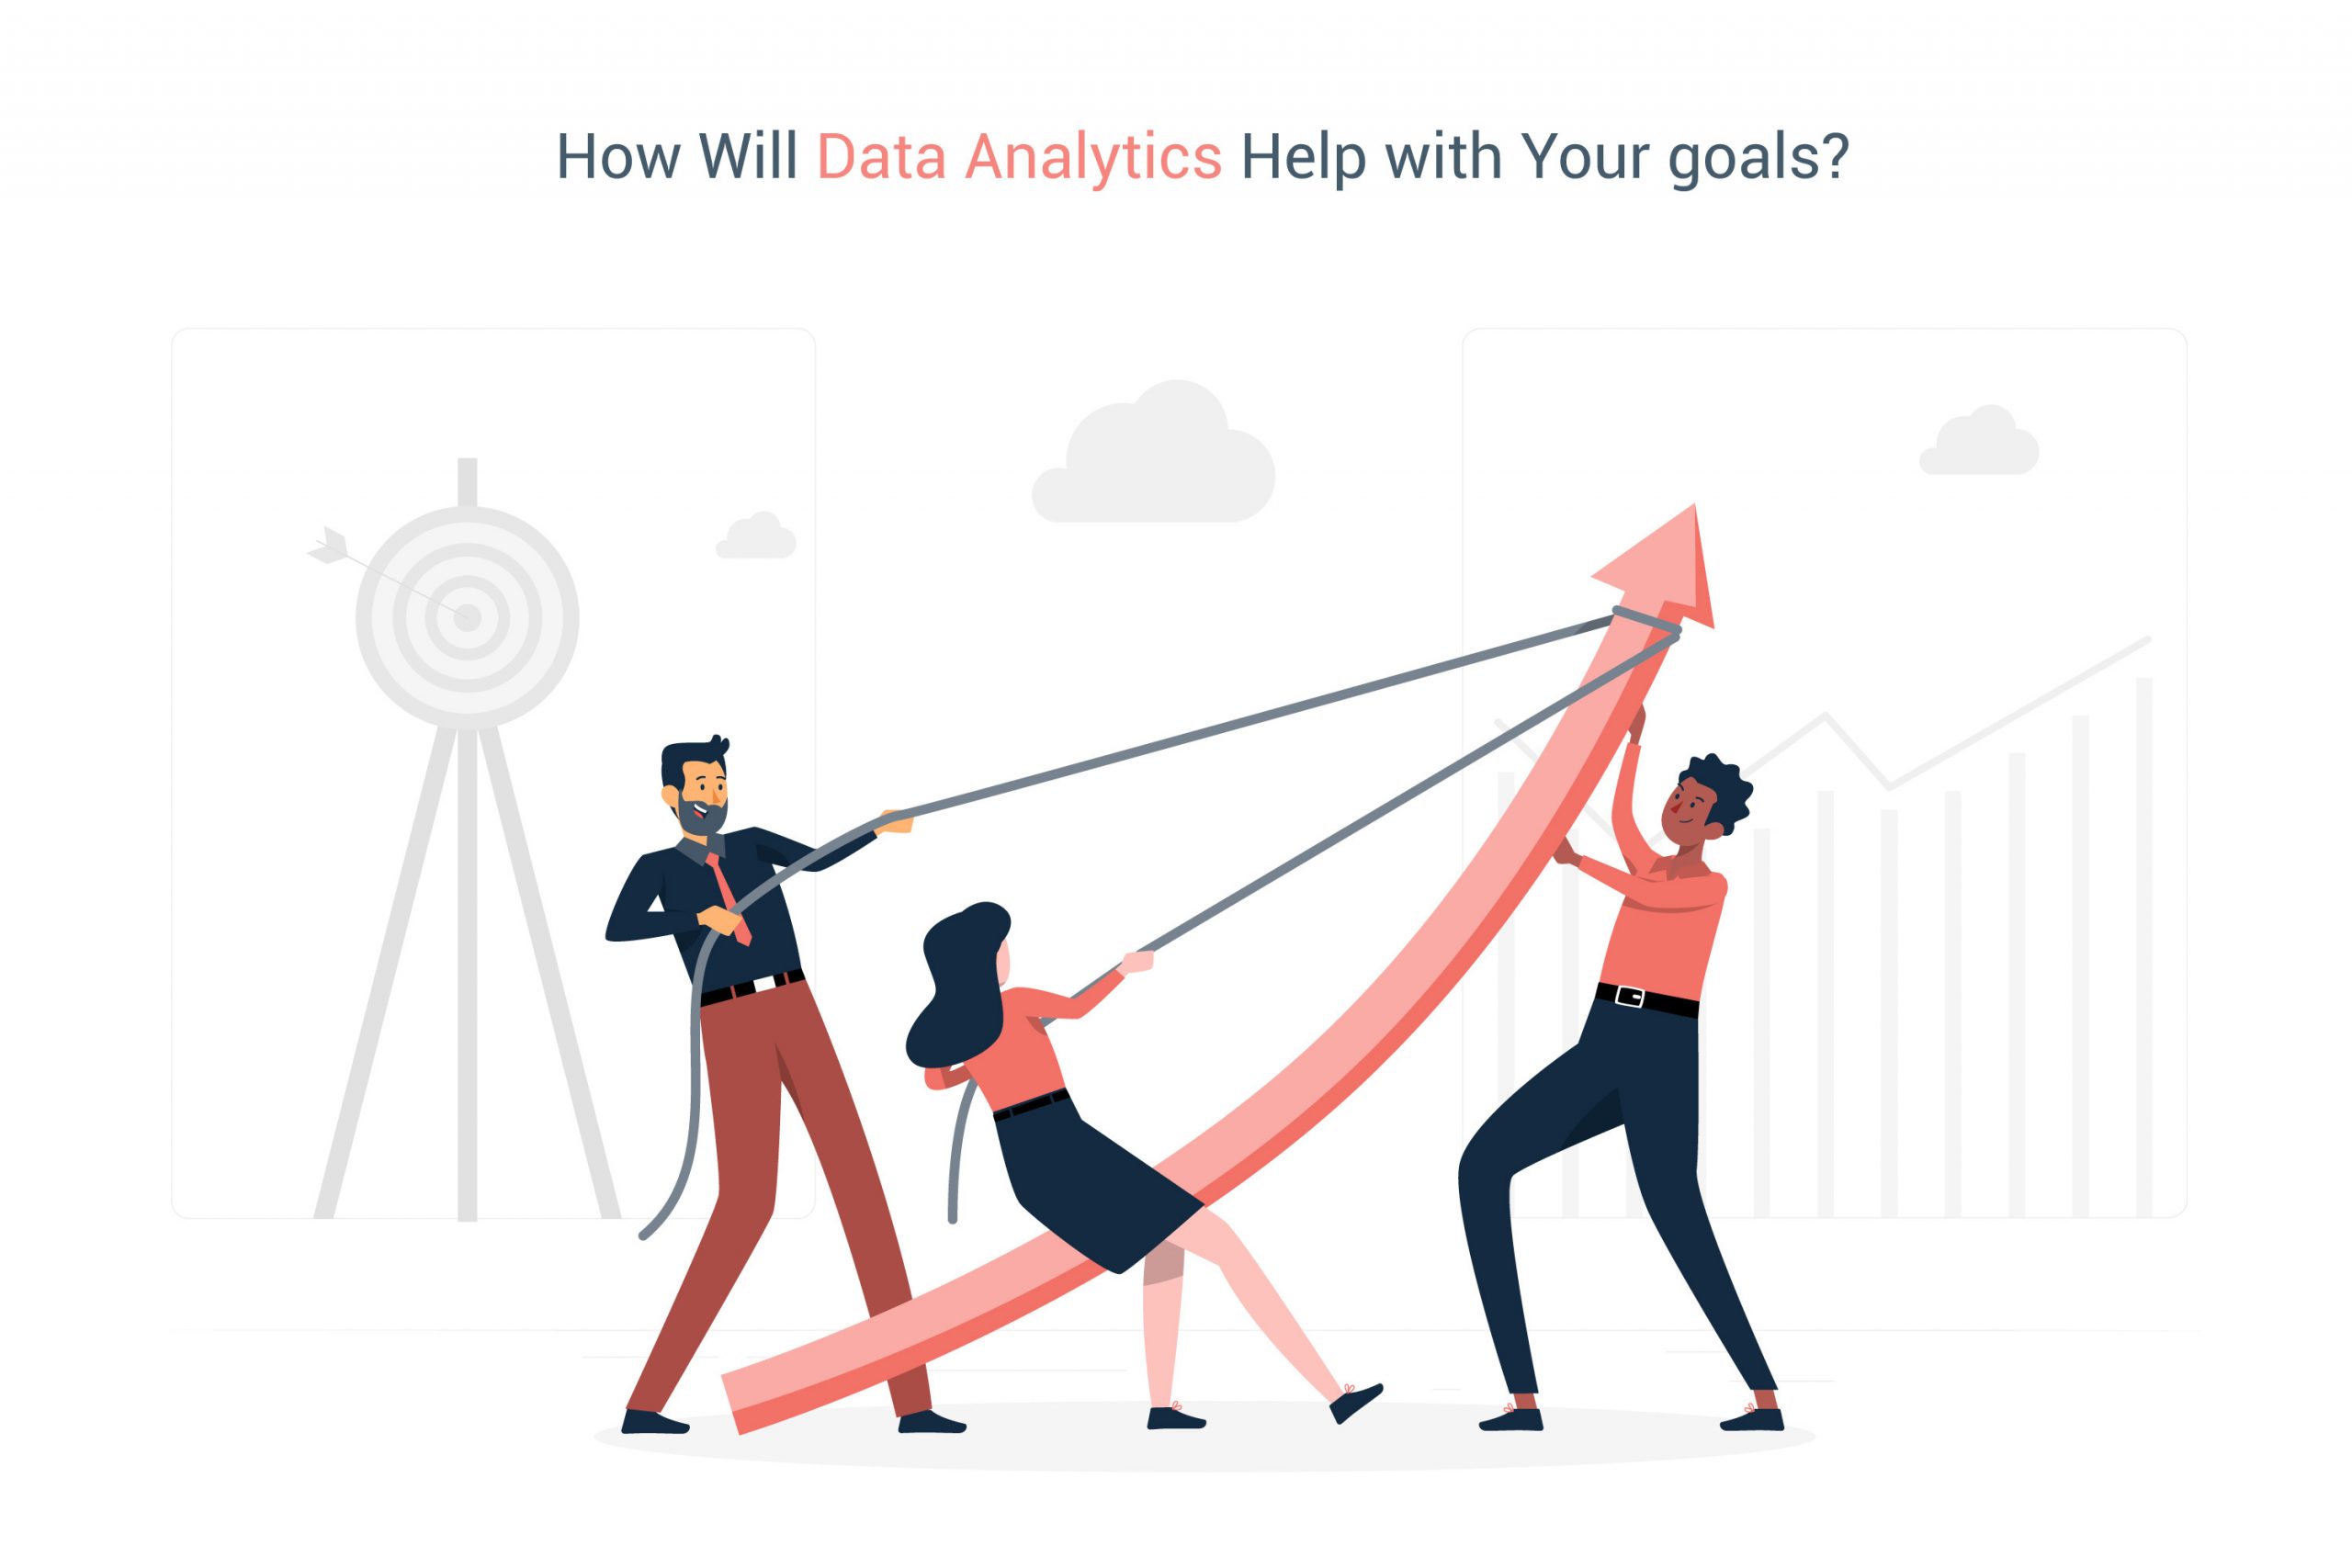 How Will Data Analytics Help With Your Goals?